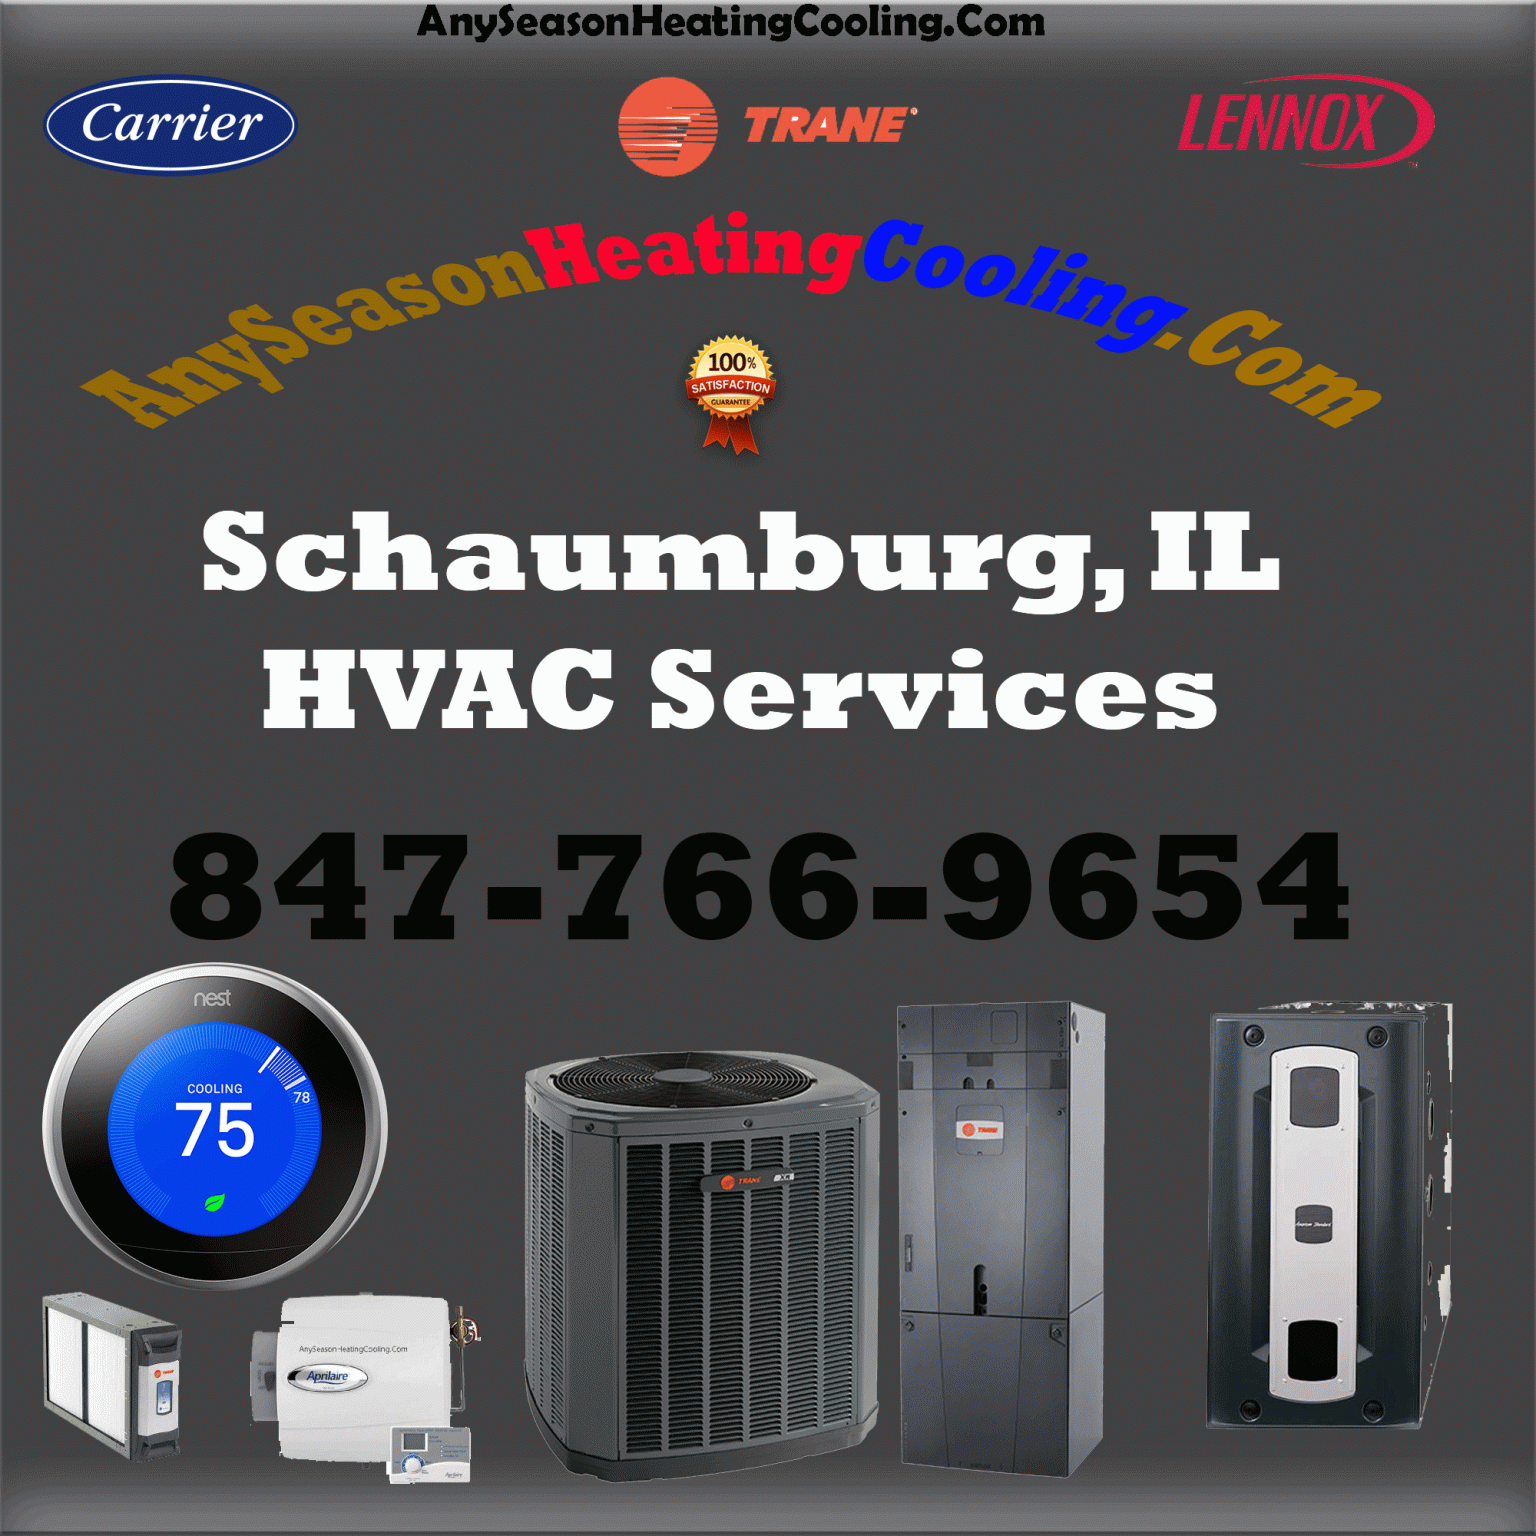 Schaumburg, IL Furnace Replacement for Less